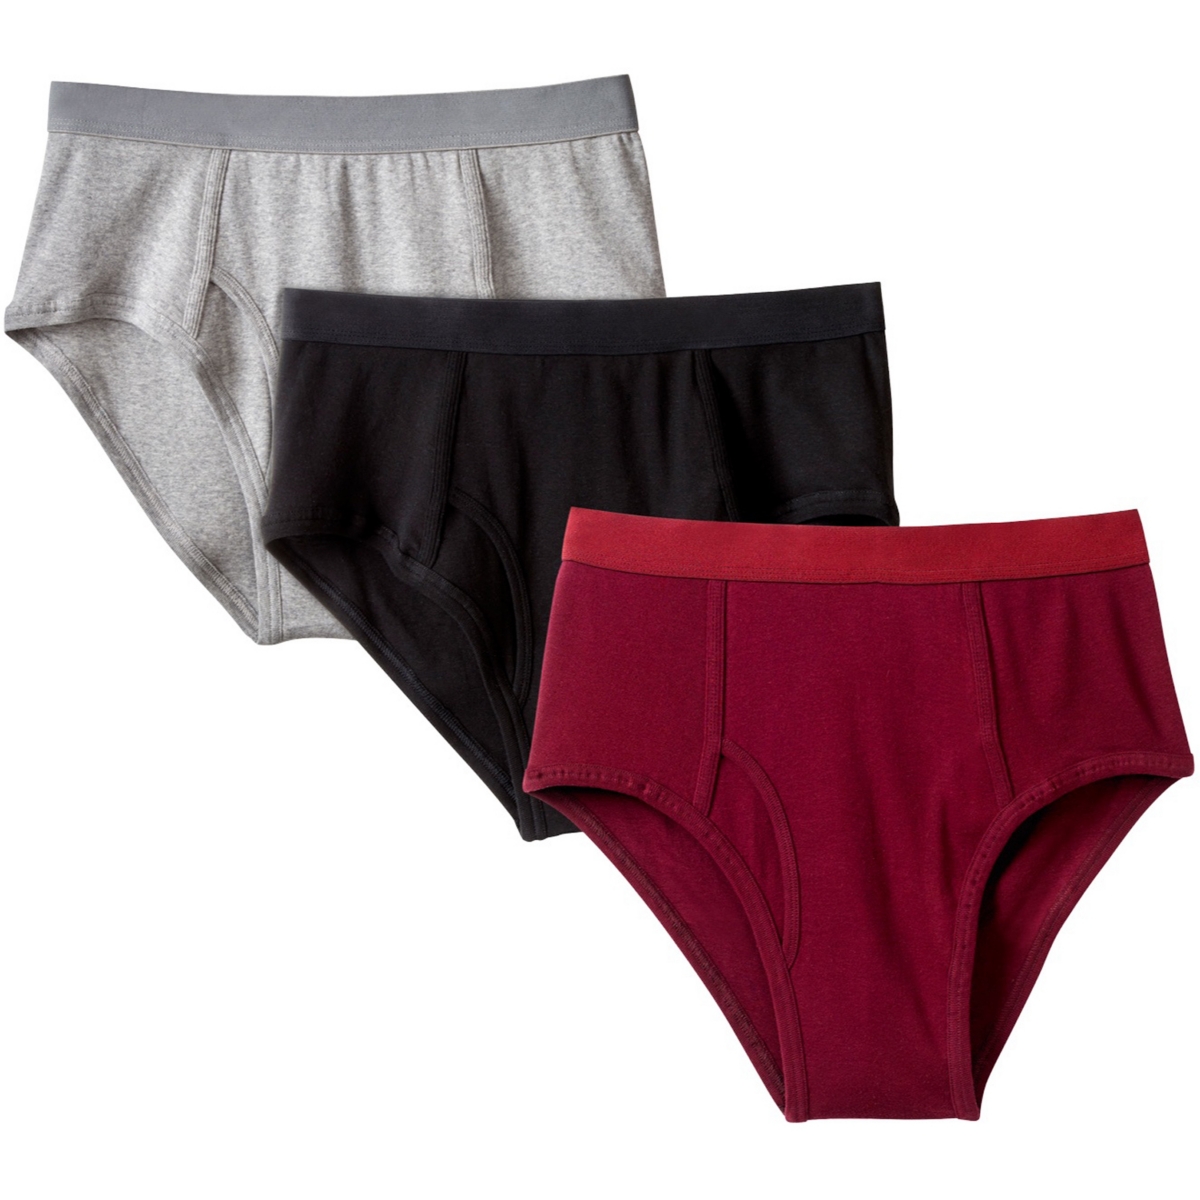 Big & Tall Classic Cotton Briefs 3-Pack - Assorted basic